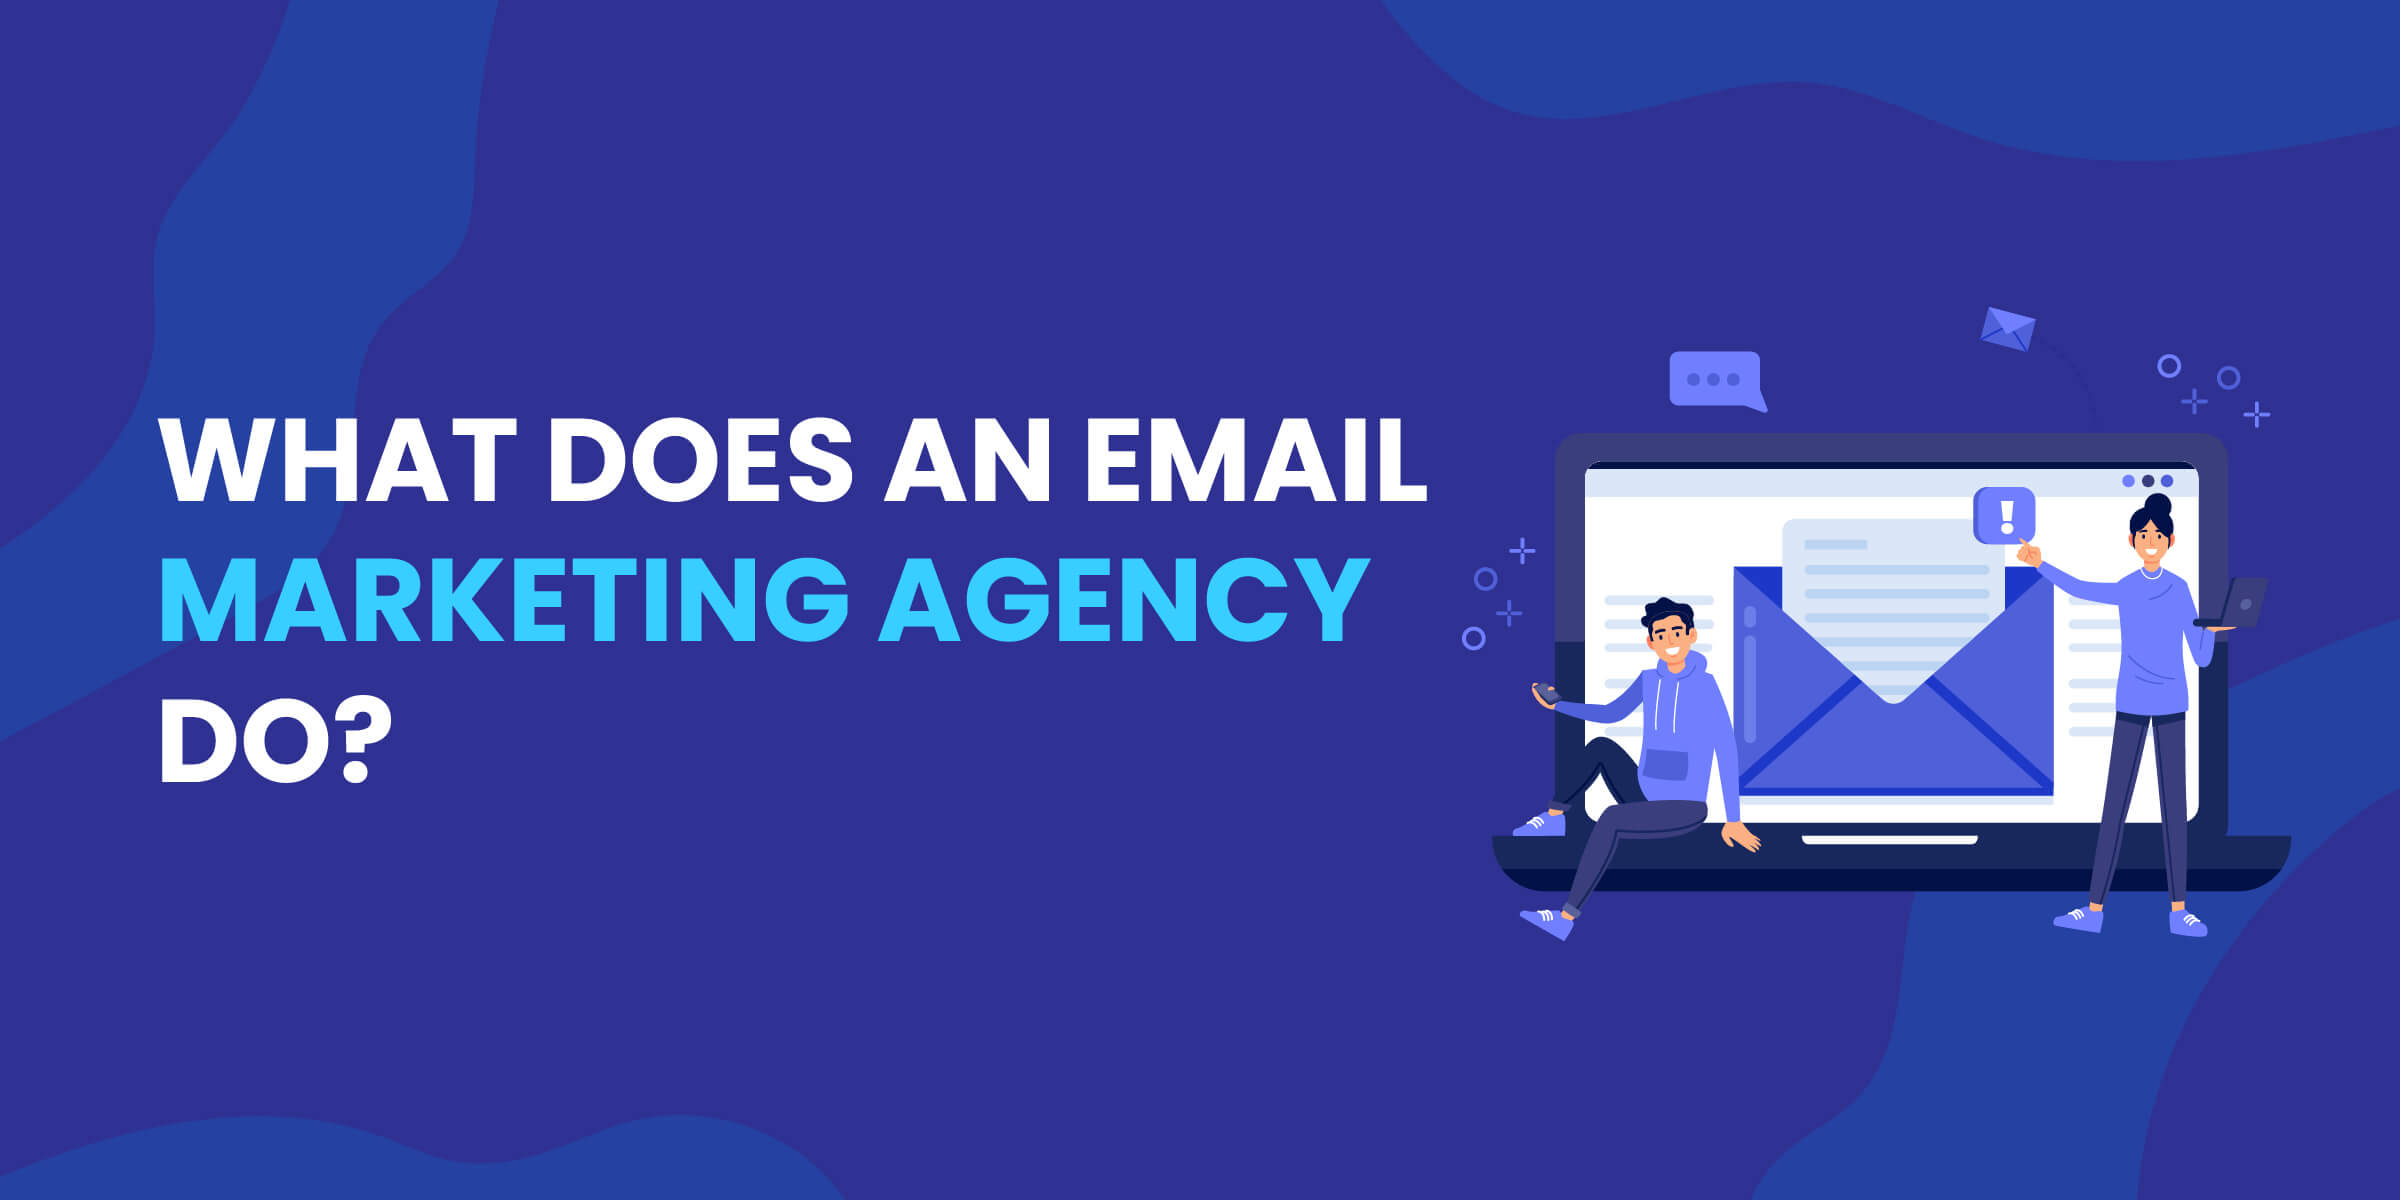 What Does an Email Marketing Agency Do